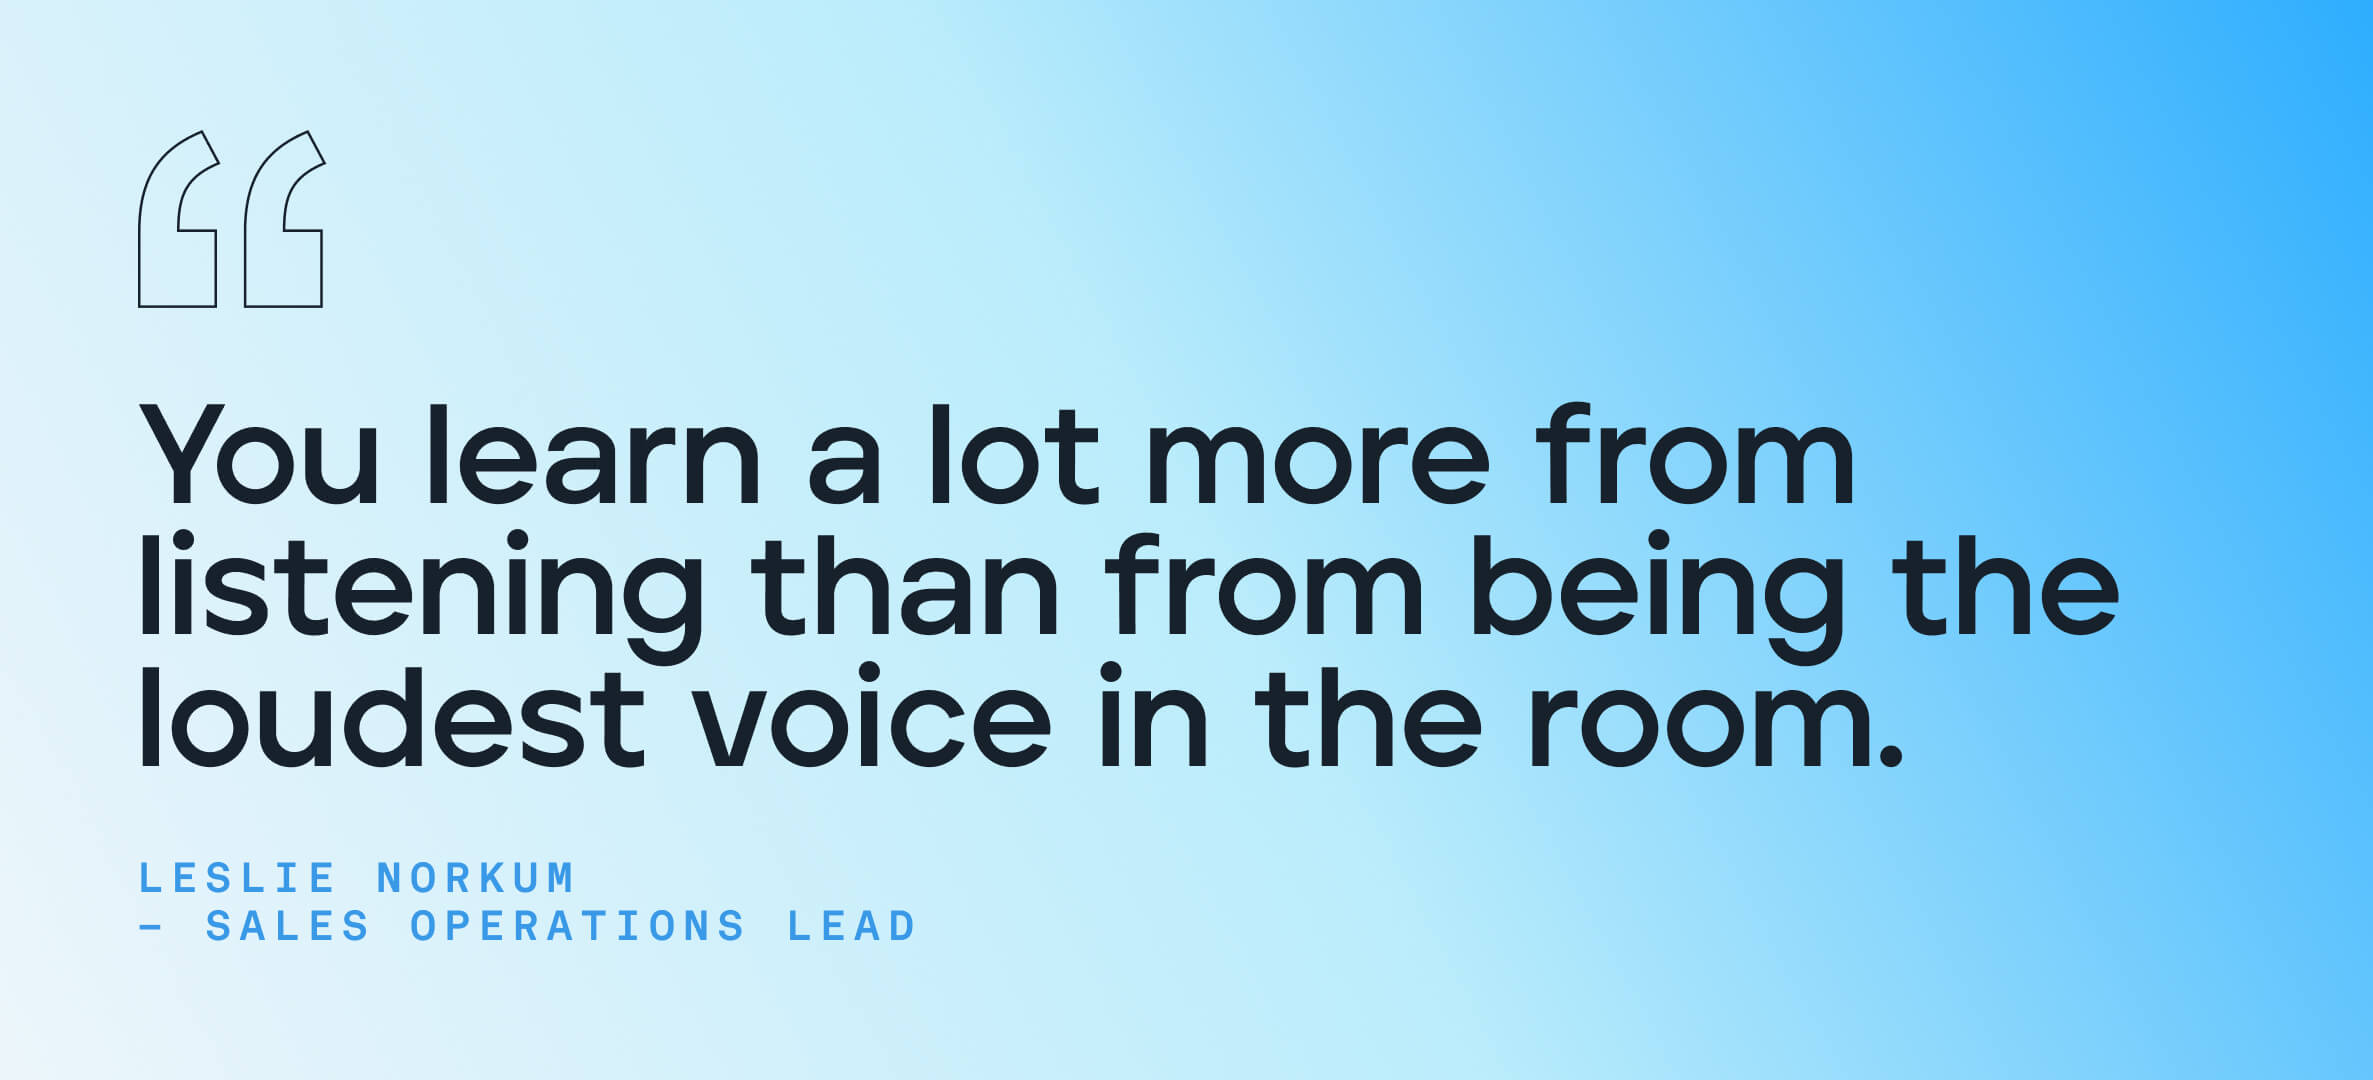 You learn a lot more from listening than from being the loudest voice in the room.